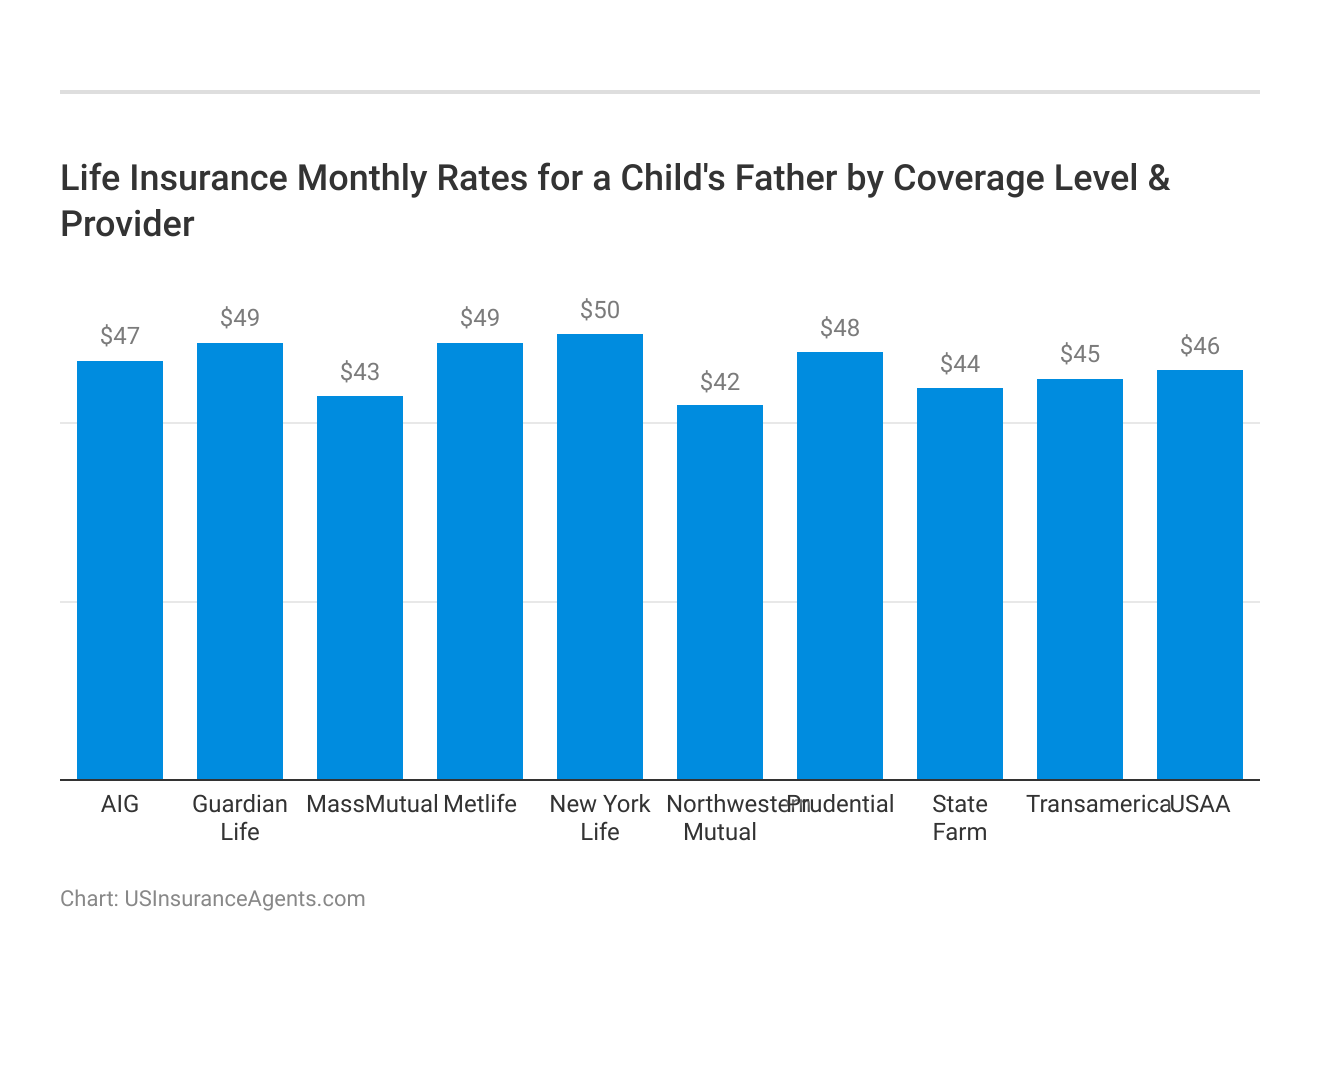 <h3>Life Insurance Monthly Rates for a Child's Father by Coverage Level & Provider</h3>